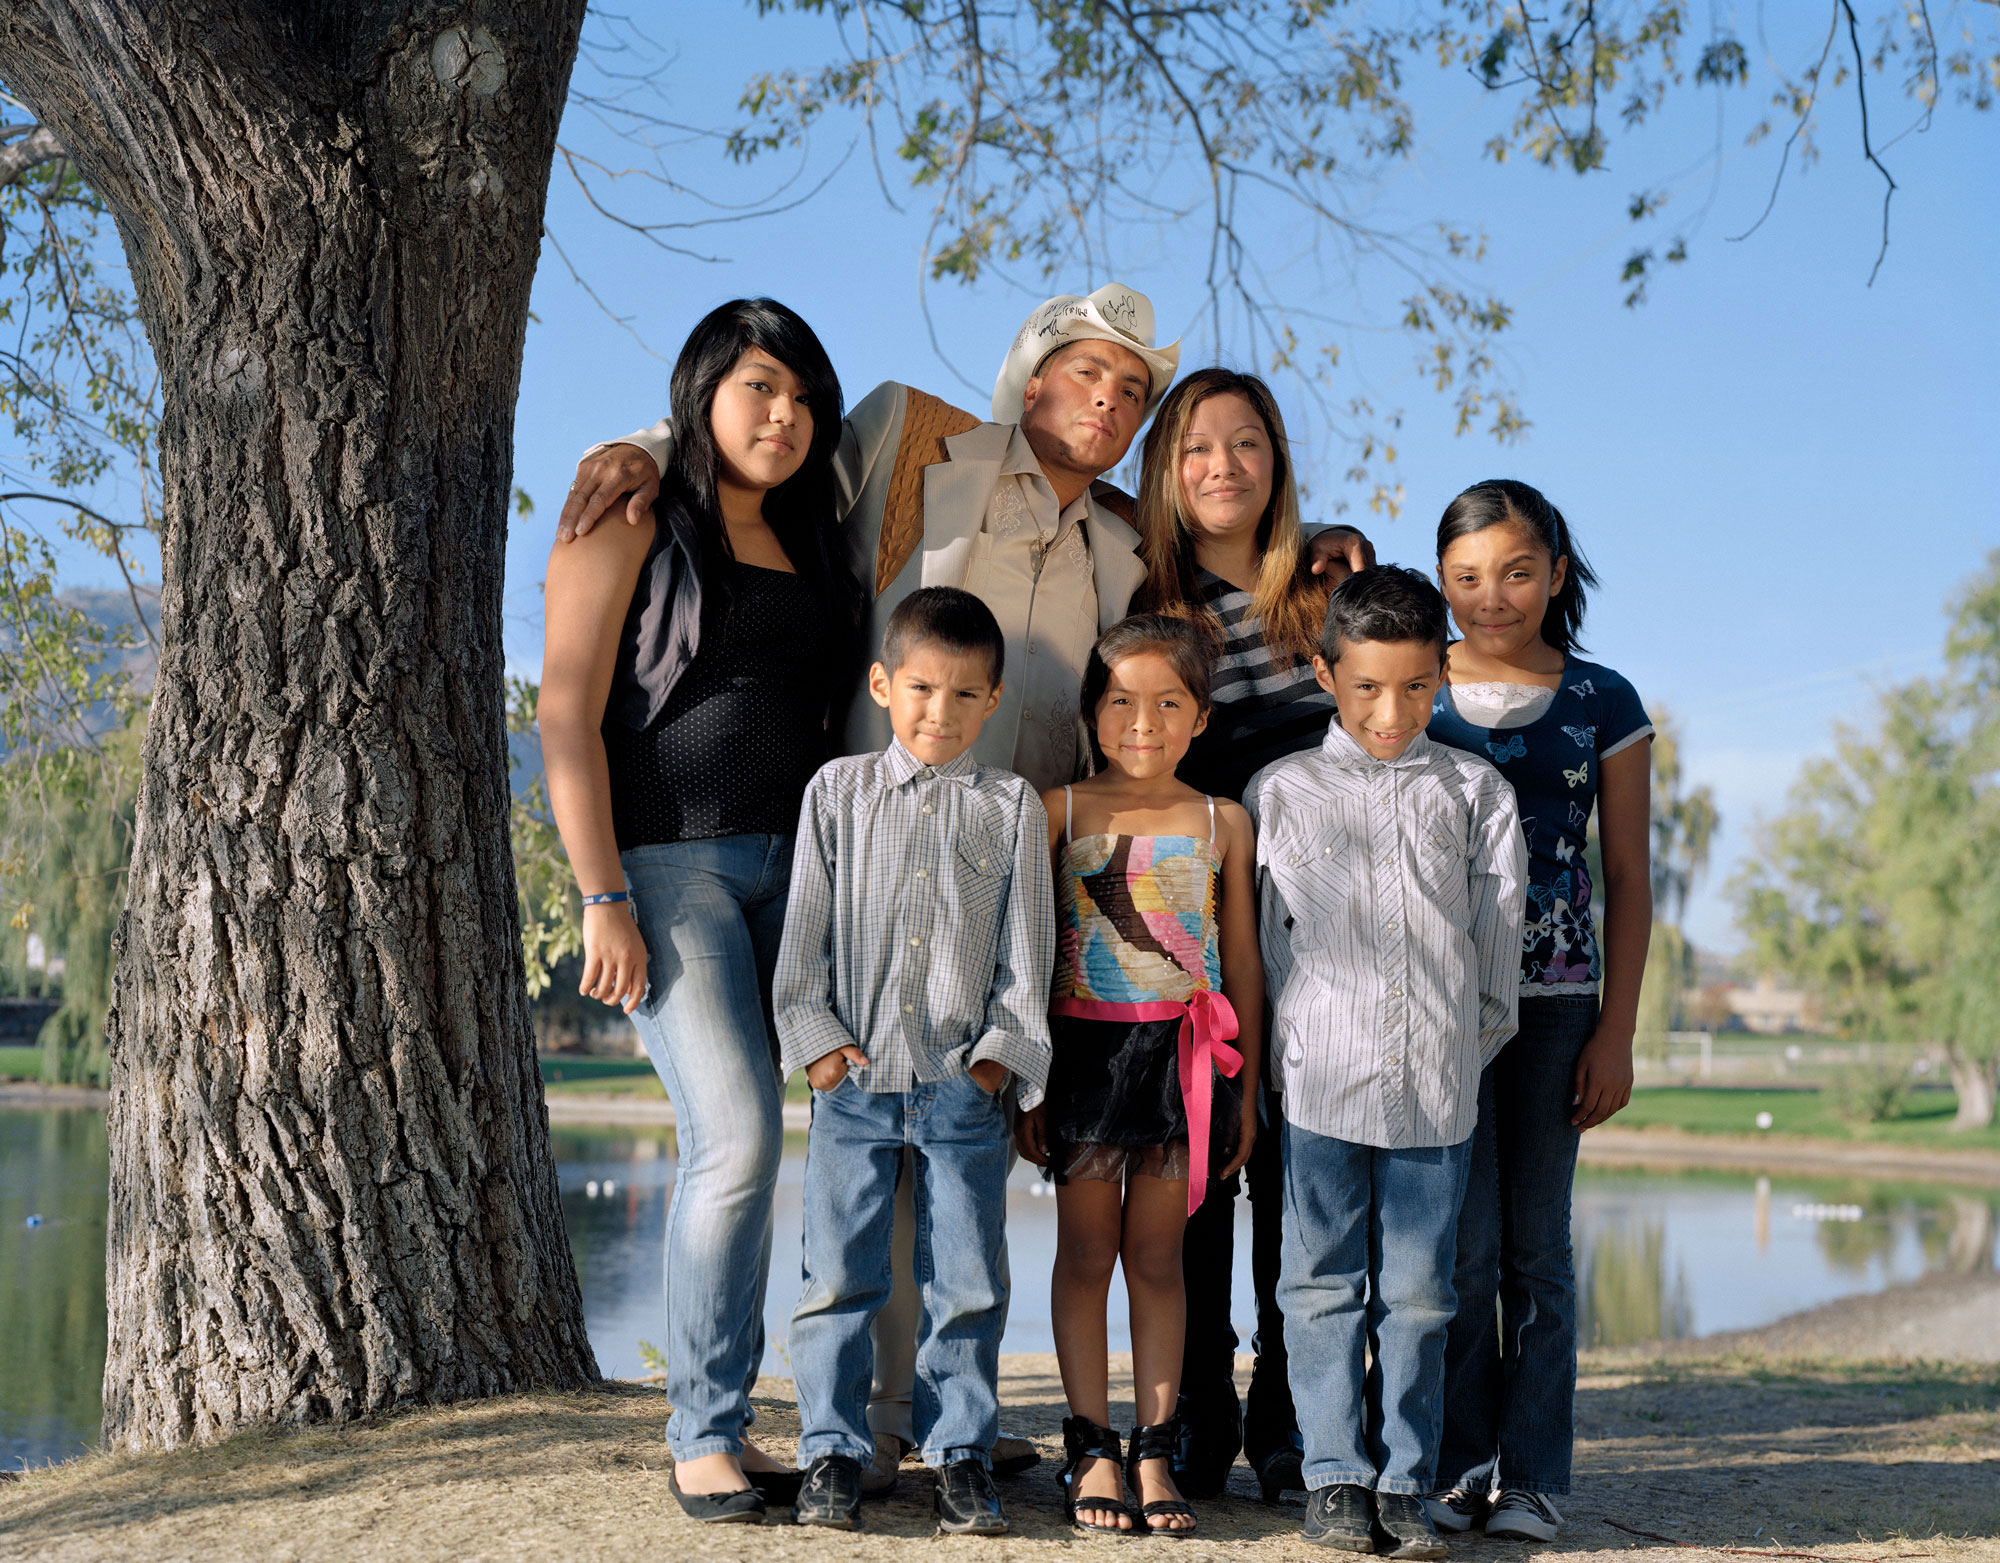 Kathya Maria Landeros, Juan's family, Eastern Washington, 2012. Courtesy of the artist. From the USFCAM exhibtion, The Neighbors: Slide Shows for America.